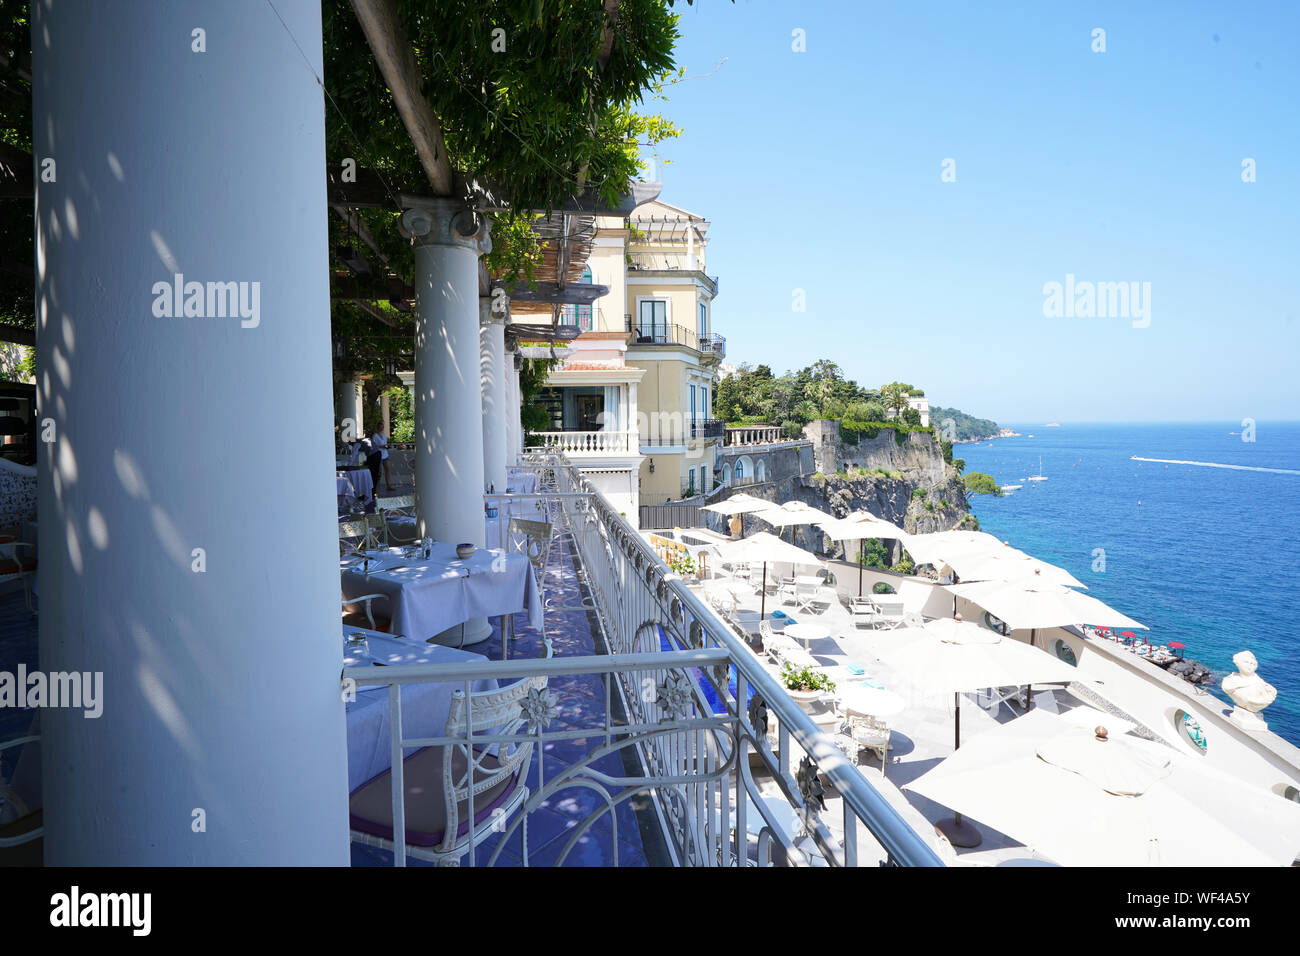 Luxurious Hotel Bellevue Syrene in Sorrento is a coastal town of Sorrento Stock Photo